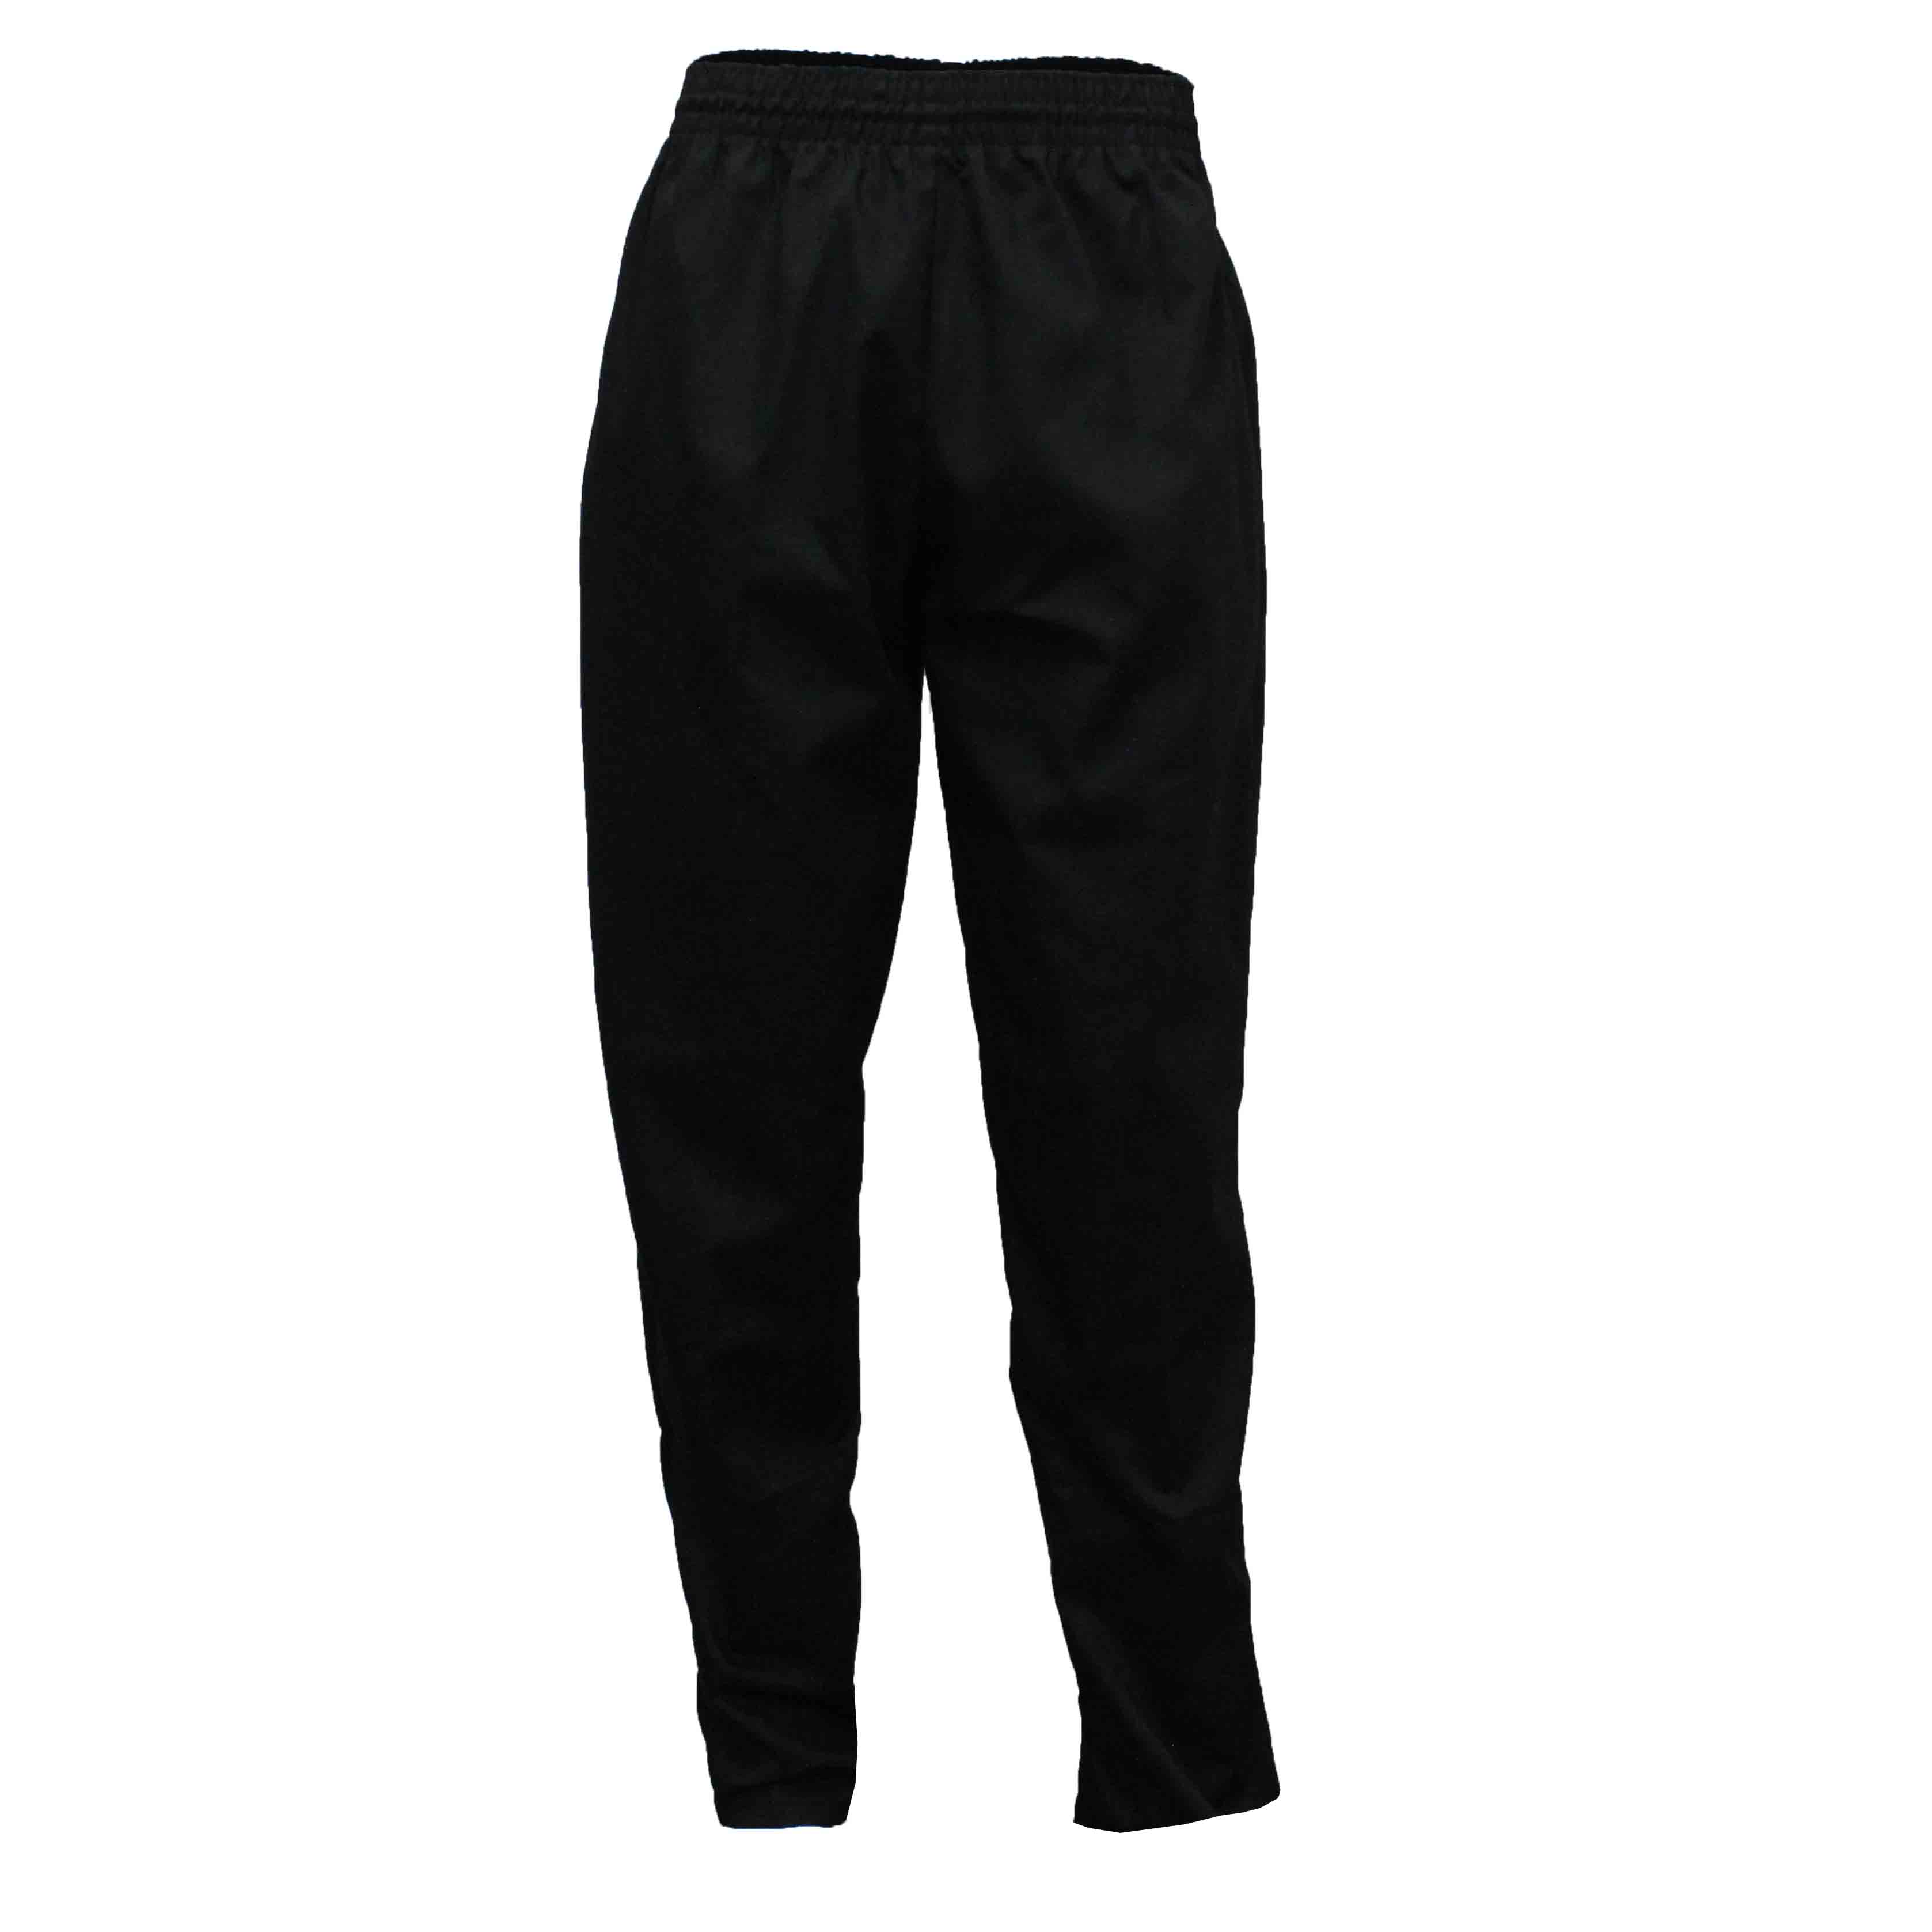 Classic Chef Pants in 100% Black Cotton Twill, 7101-3179